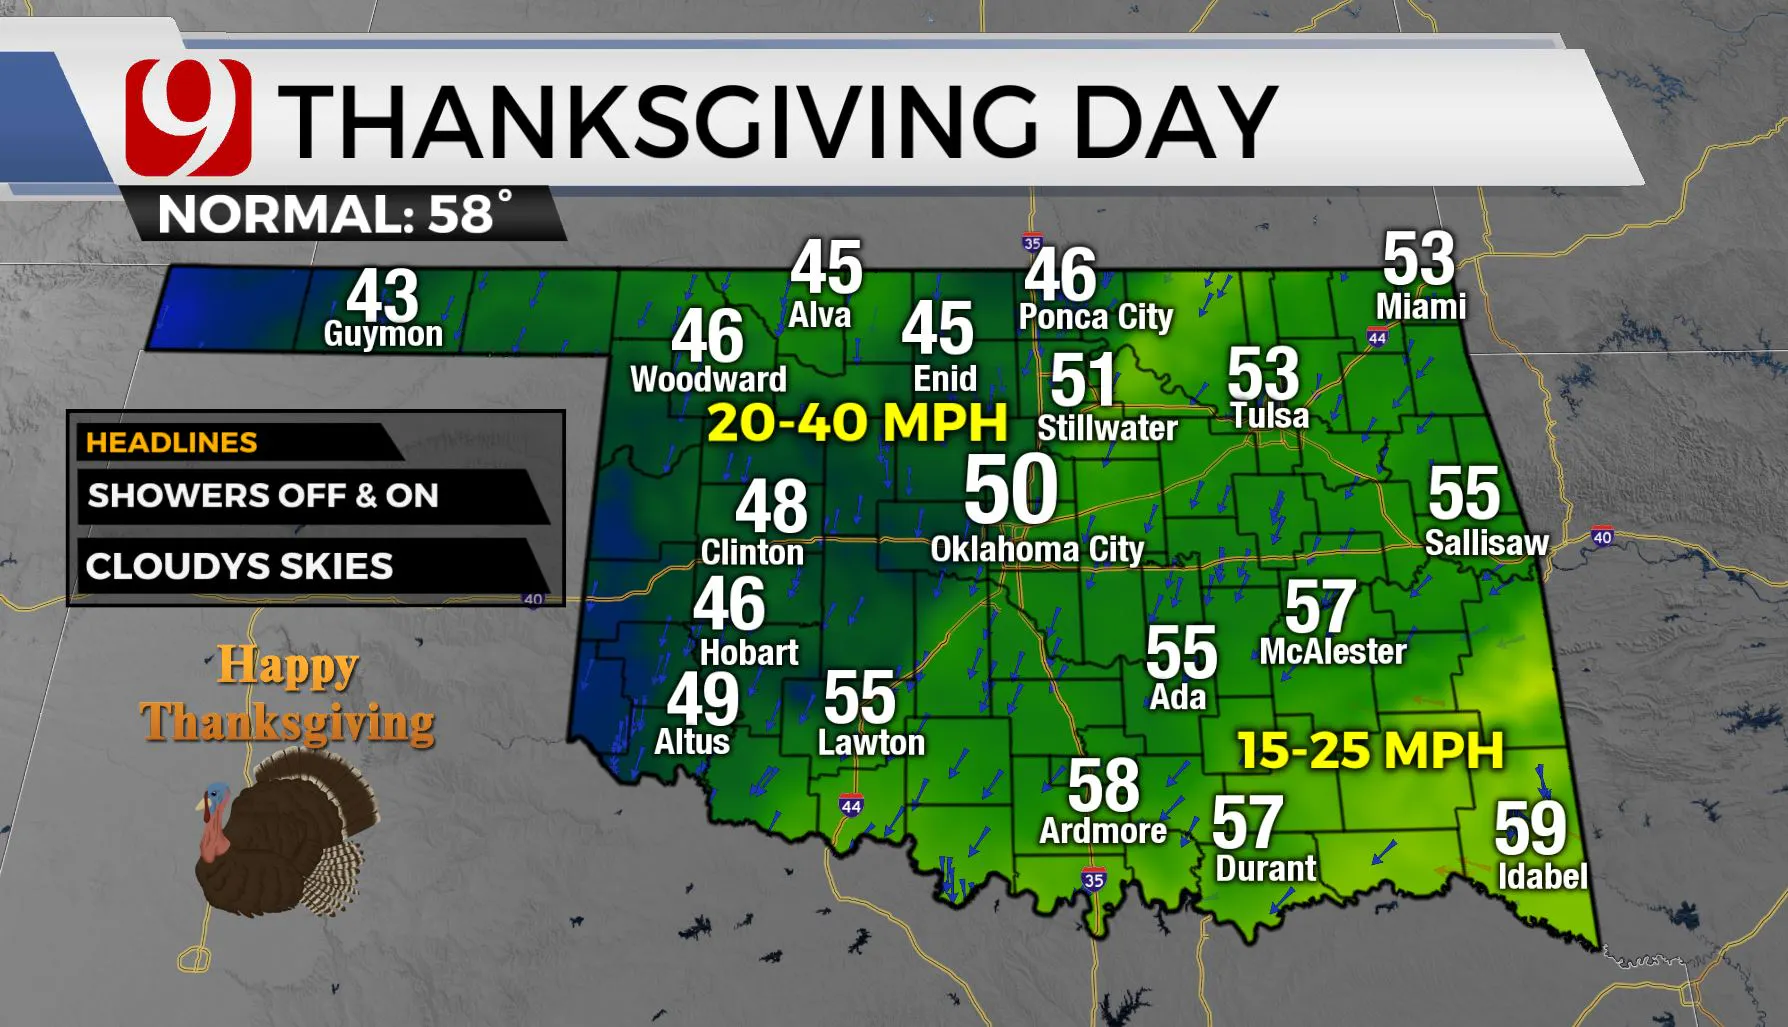 Thanksgiving day temps across the state.